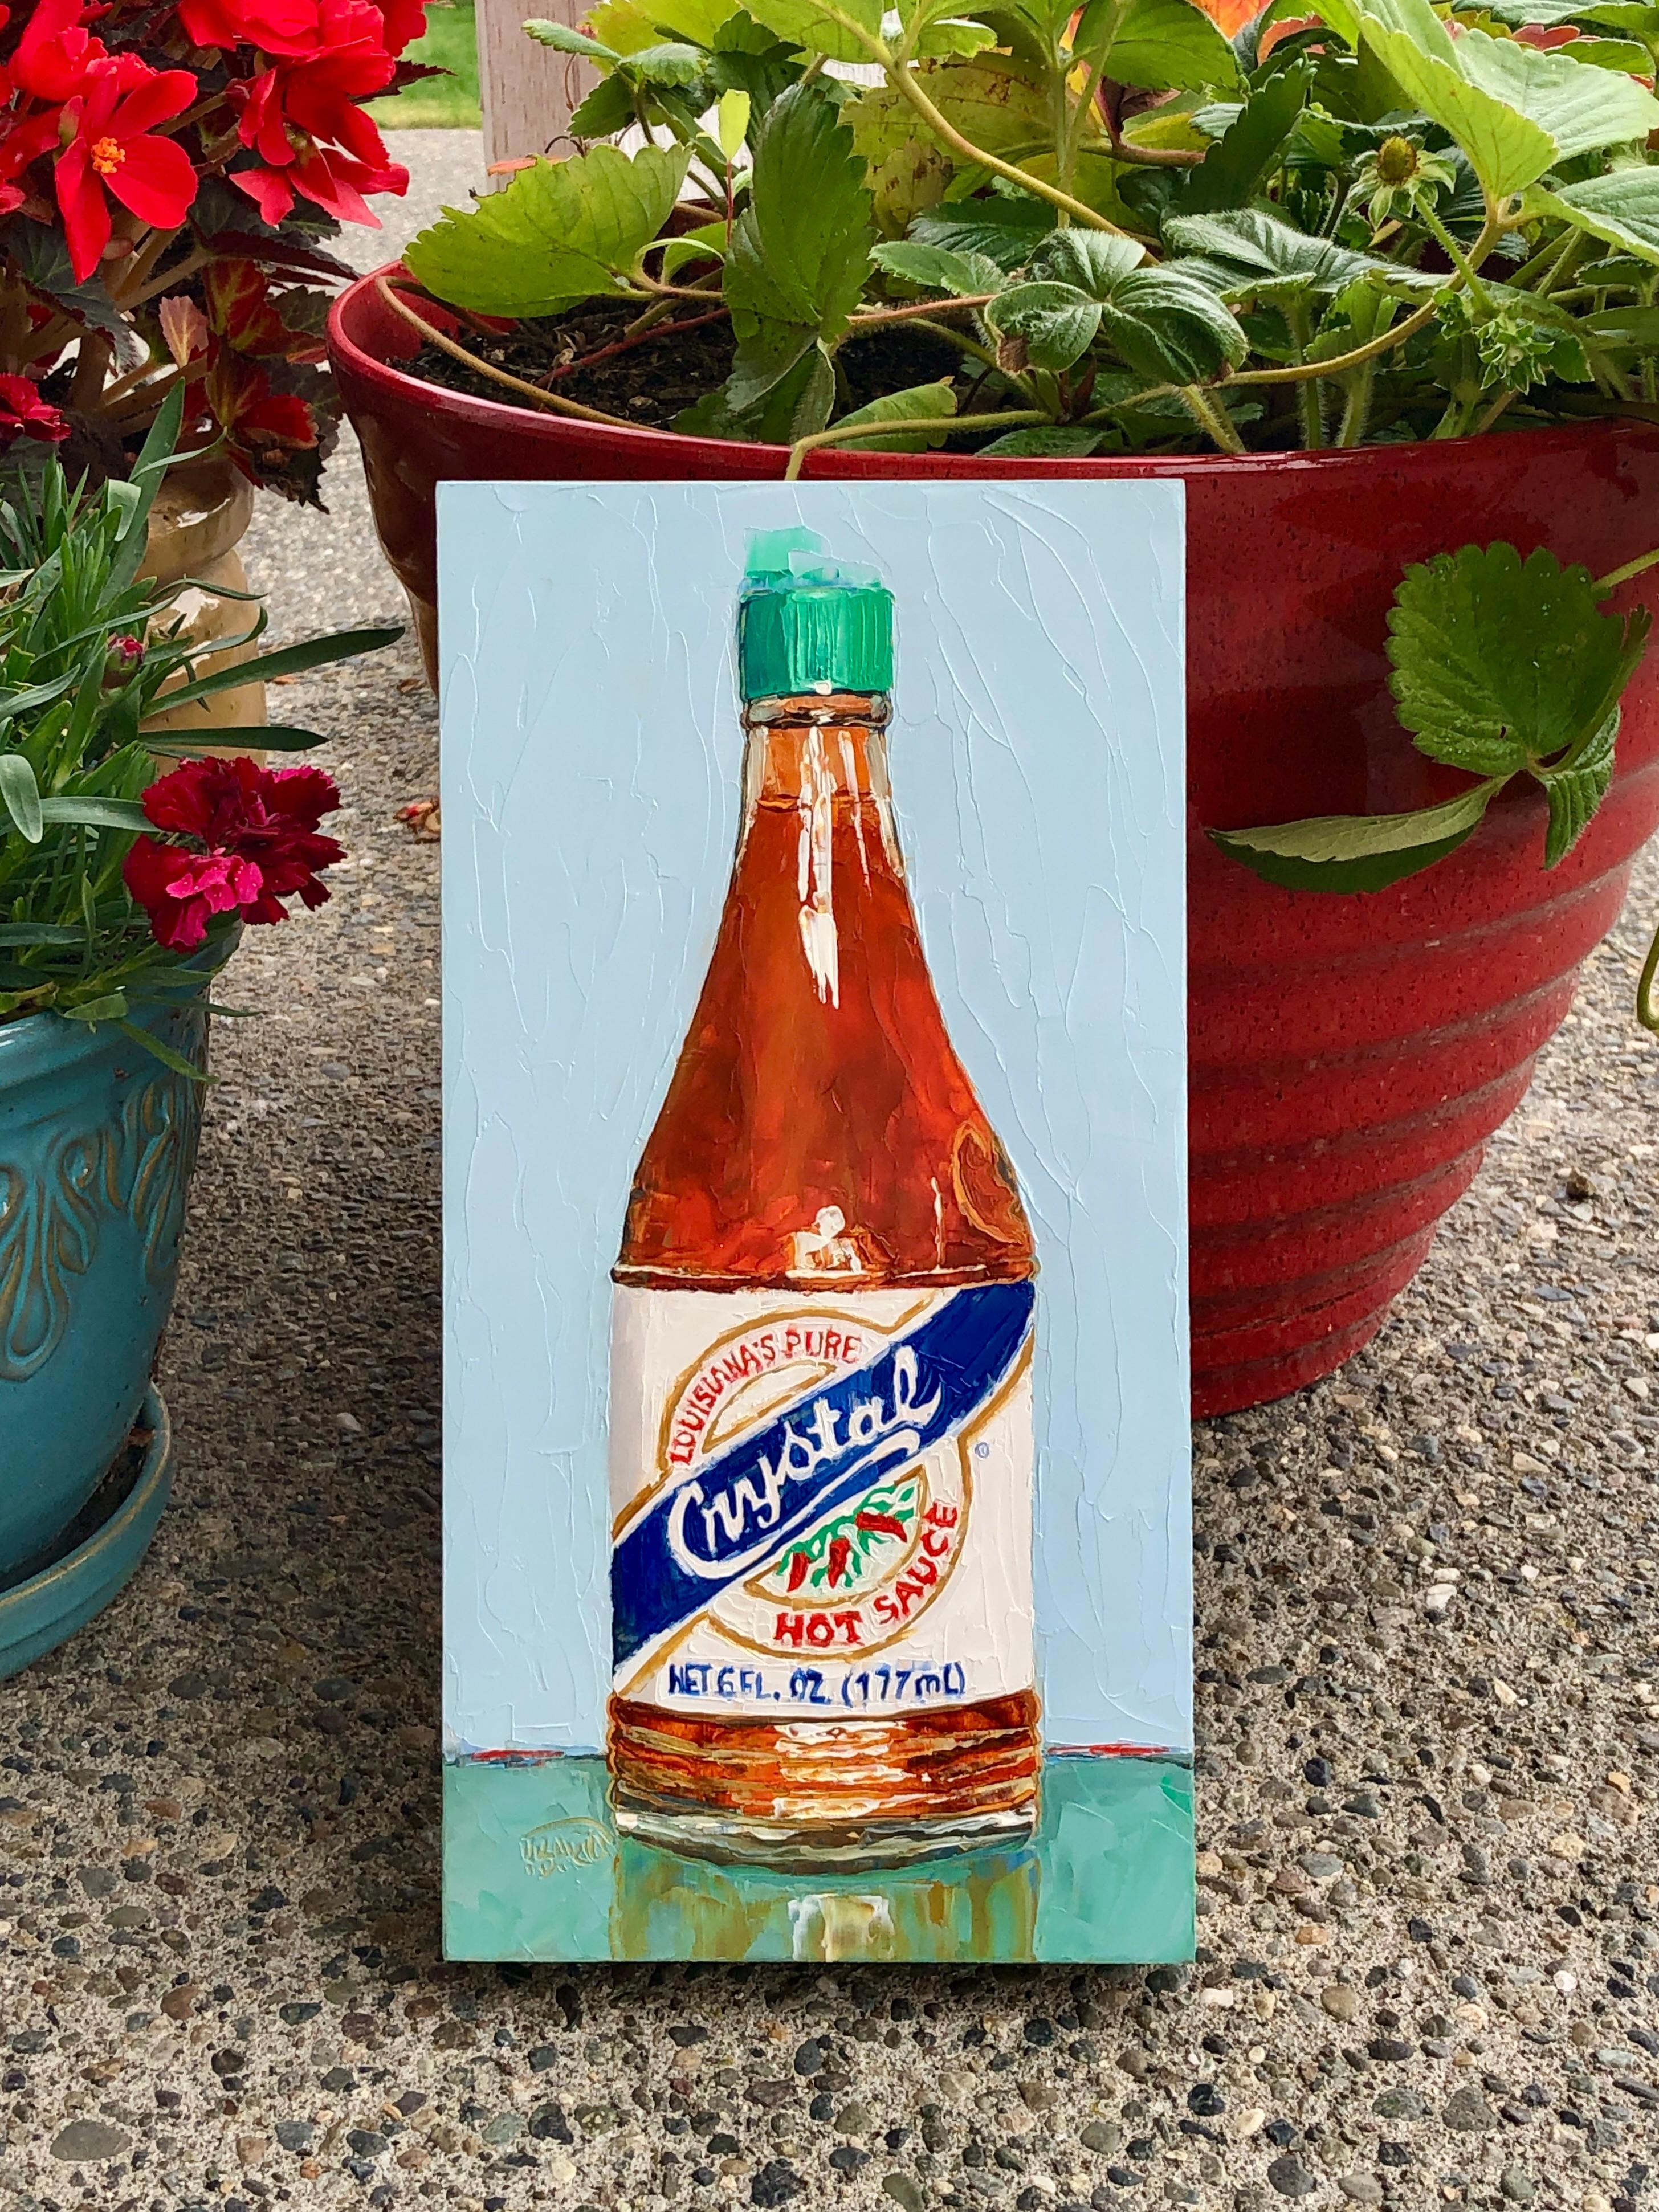 Crystal Hot Sauce, Oil Painting - Blue Still-Life Painting by Karen Barton